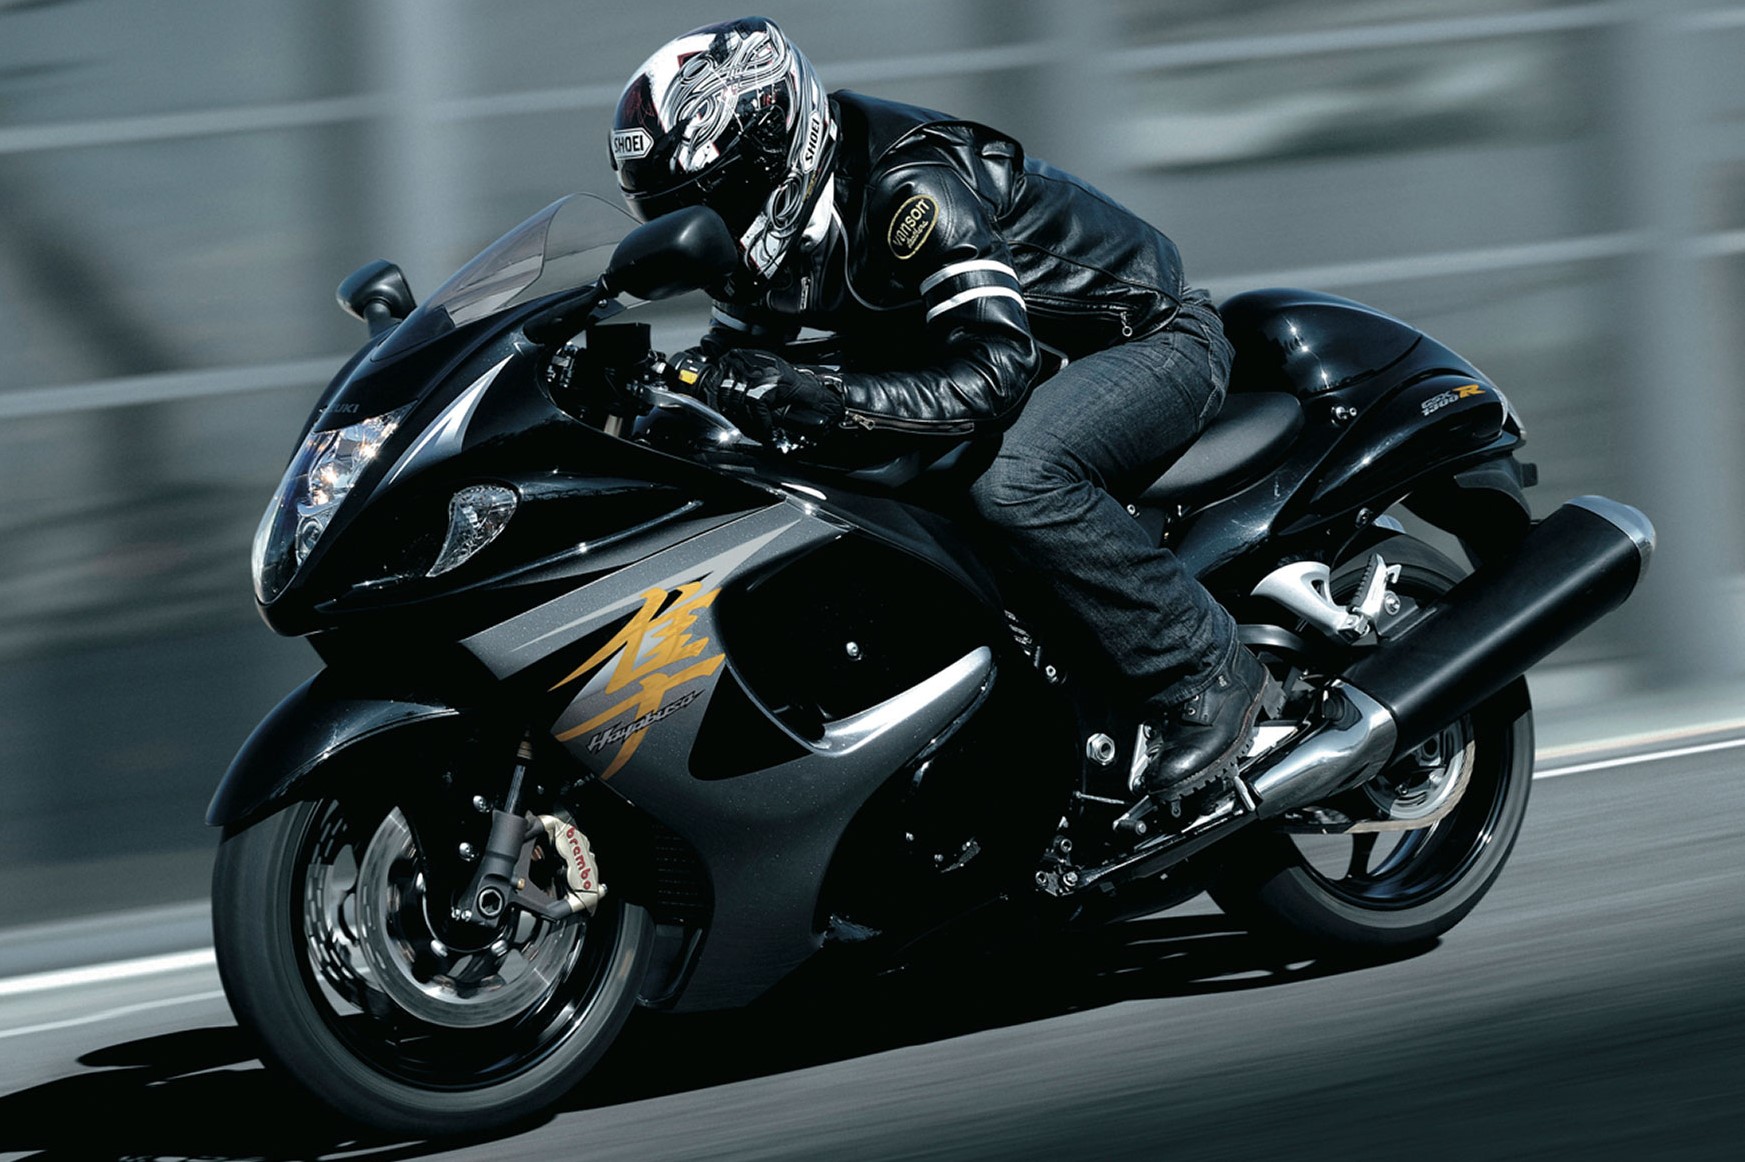 Suzuki Hayabusa to be Locally Assembled, Expected Price Cut of INR 2 Lakh